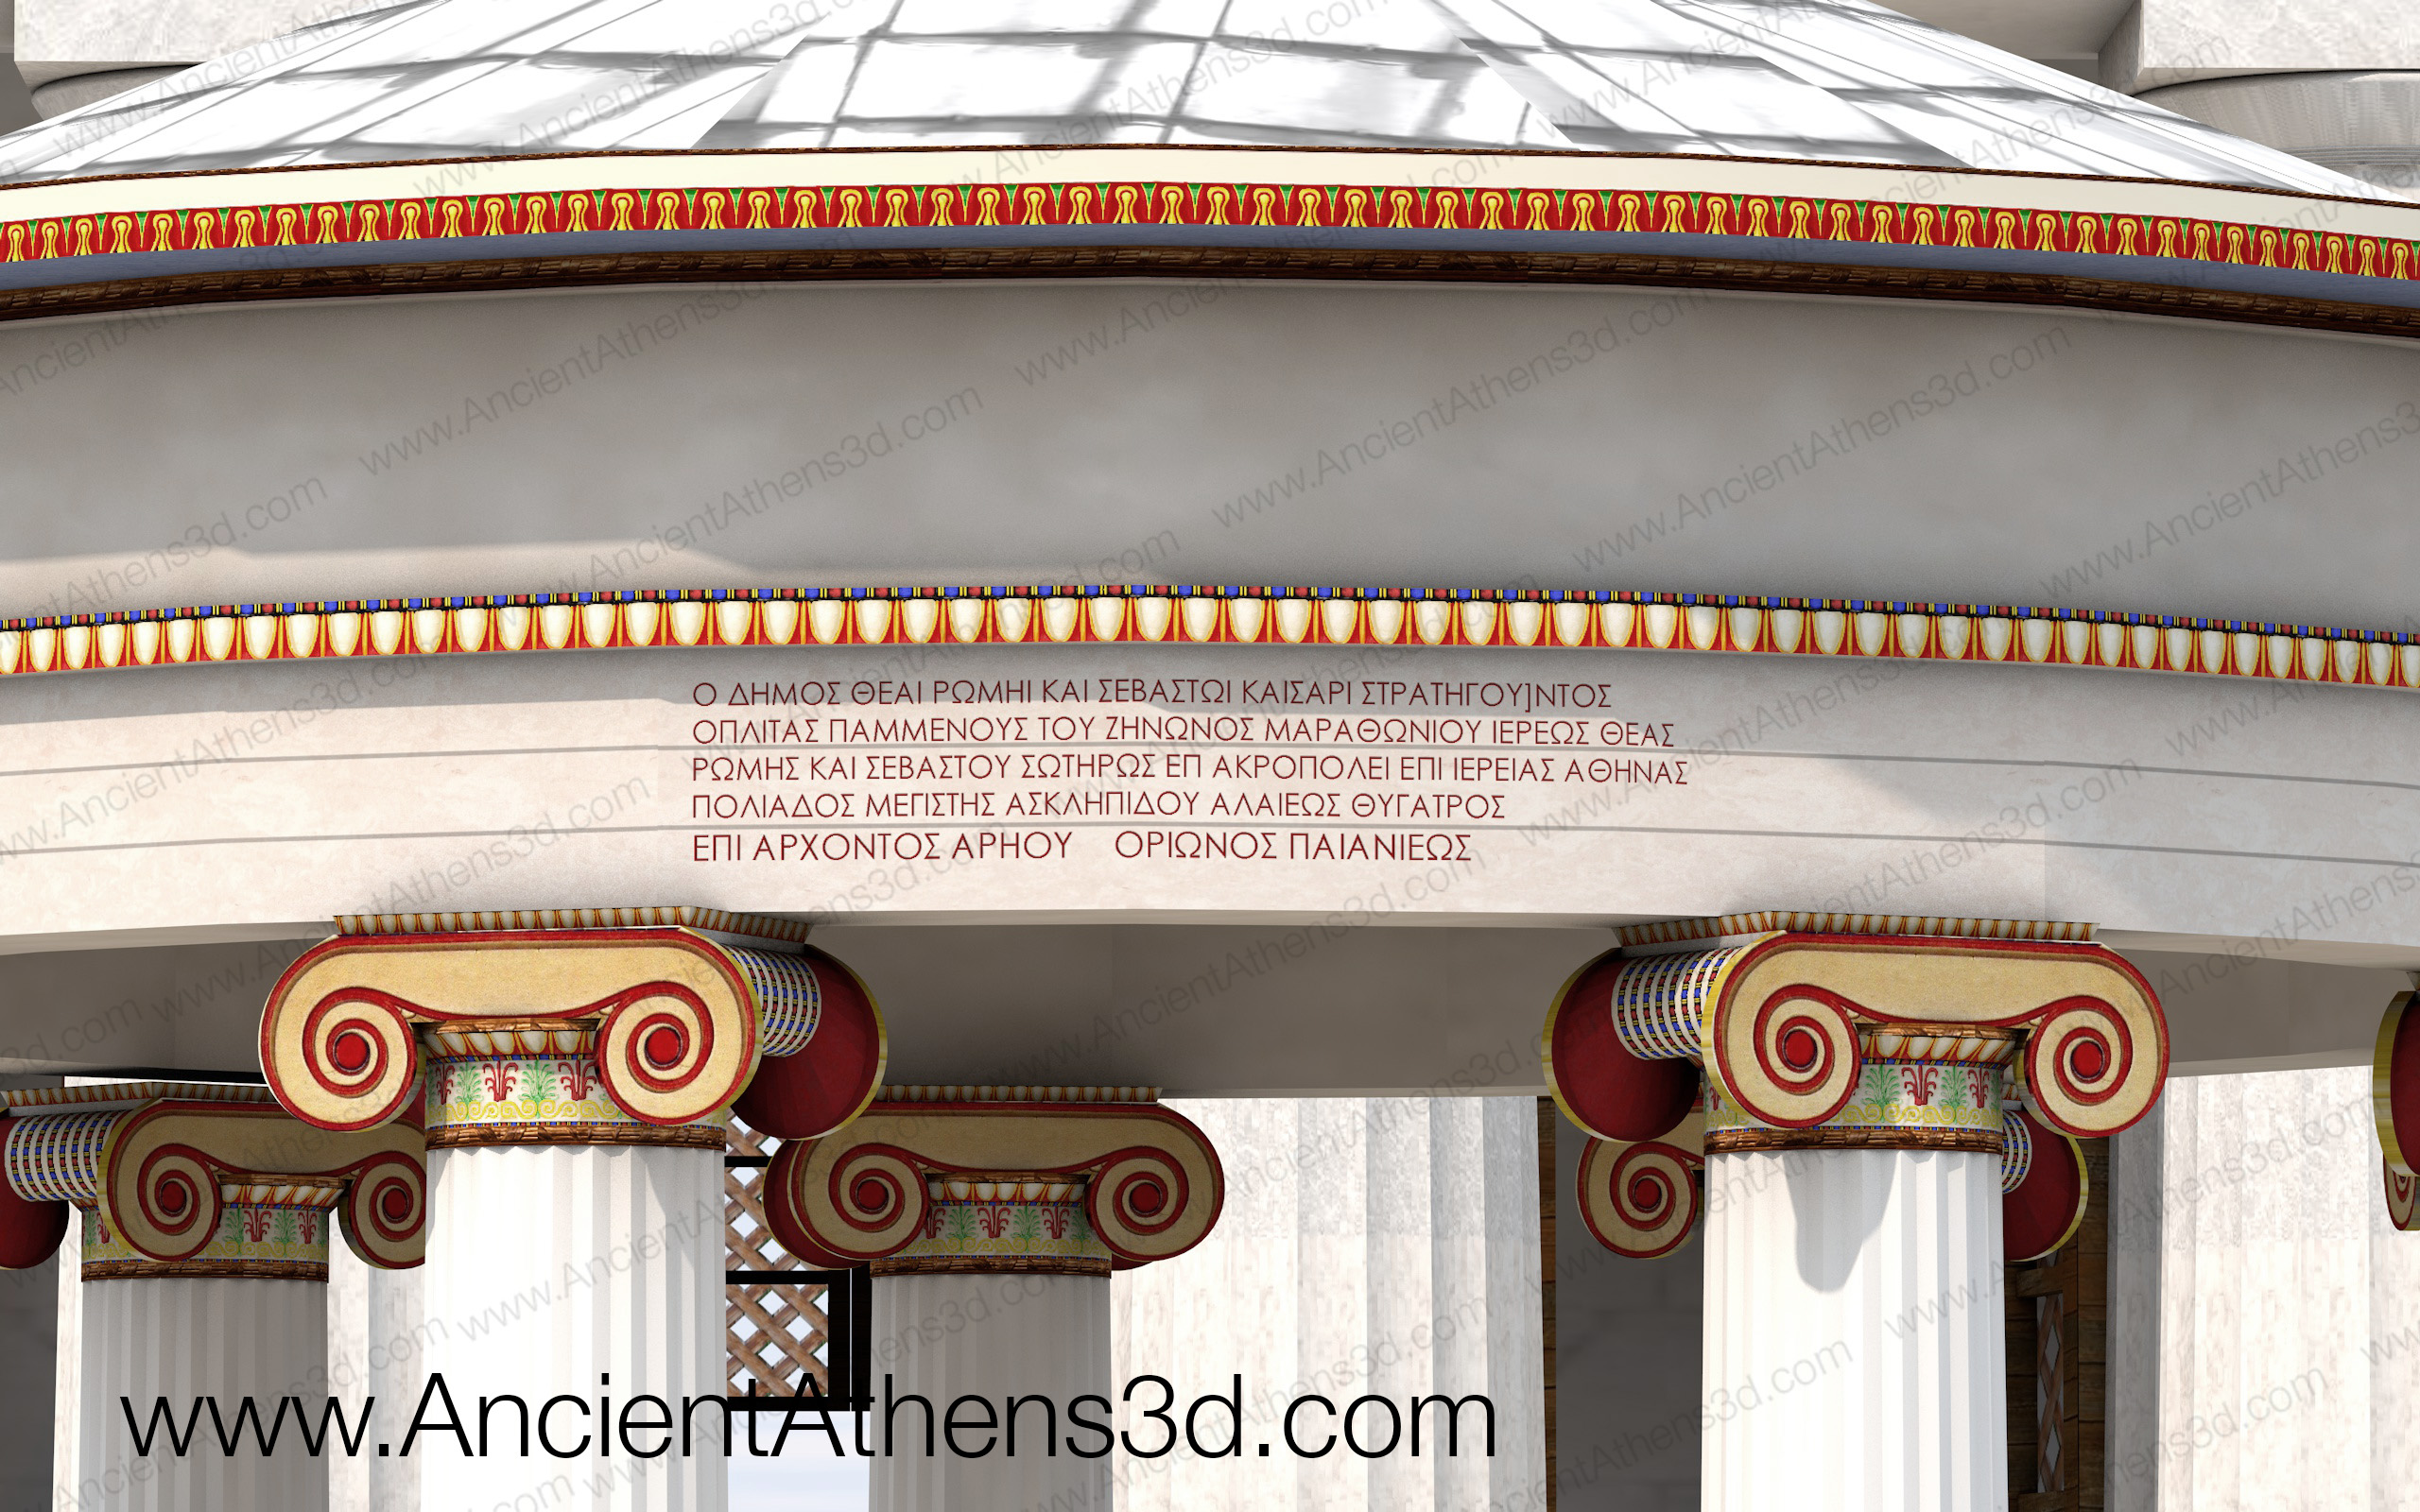 The inscription on the temple's entablature